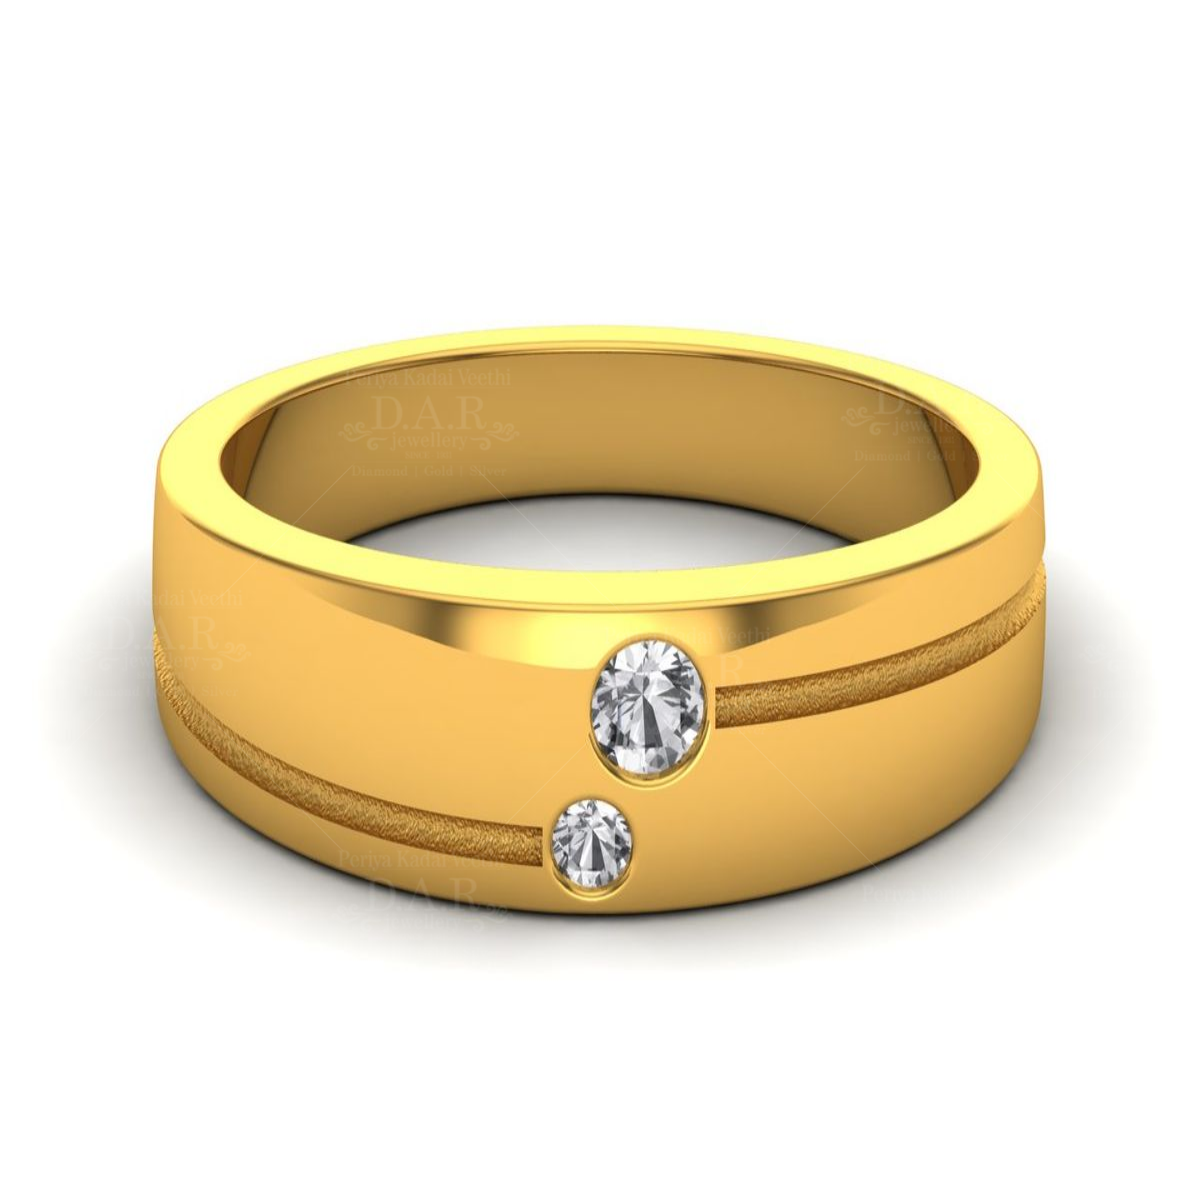 Buy Couple Rings Online  Couple Diamond & Gold Rings Designs